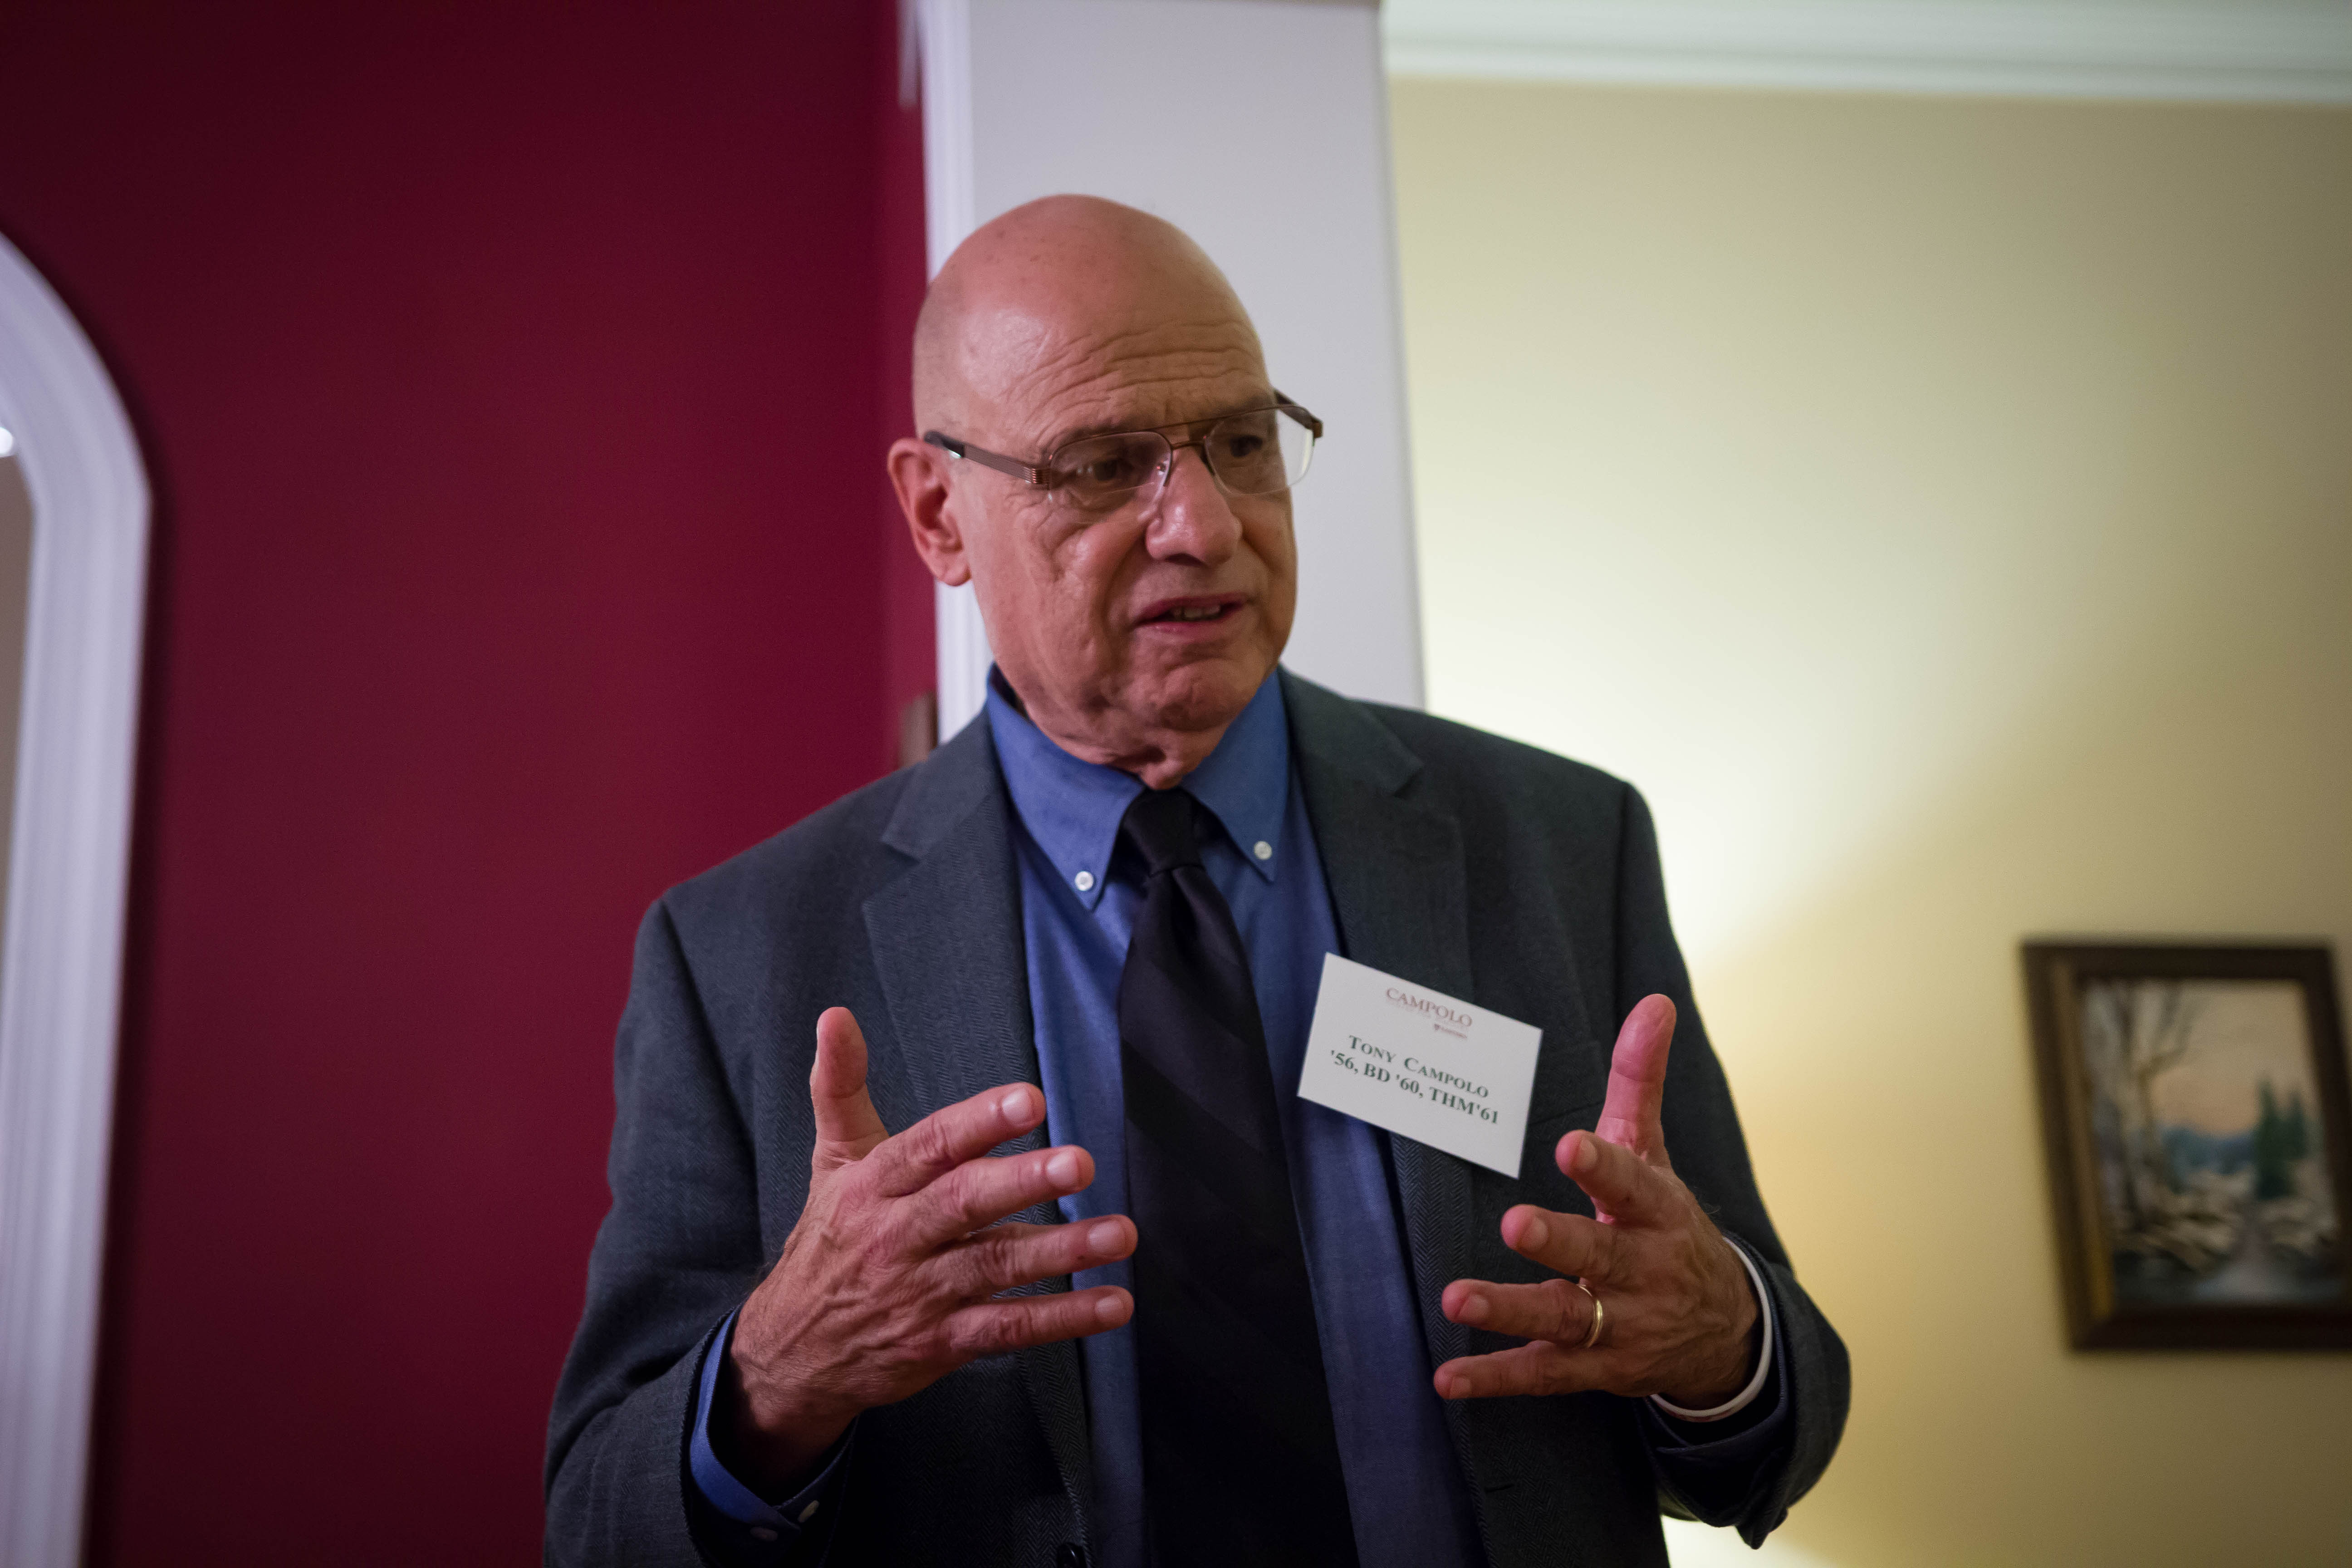 Tony Campolo Lecturing